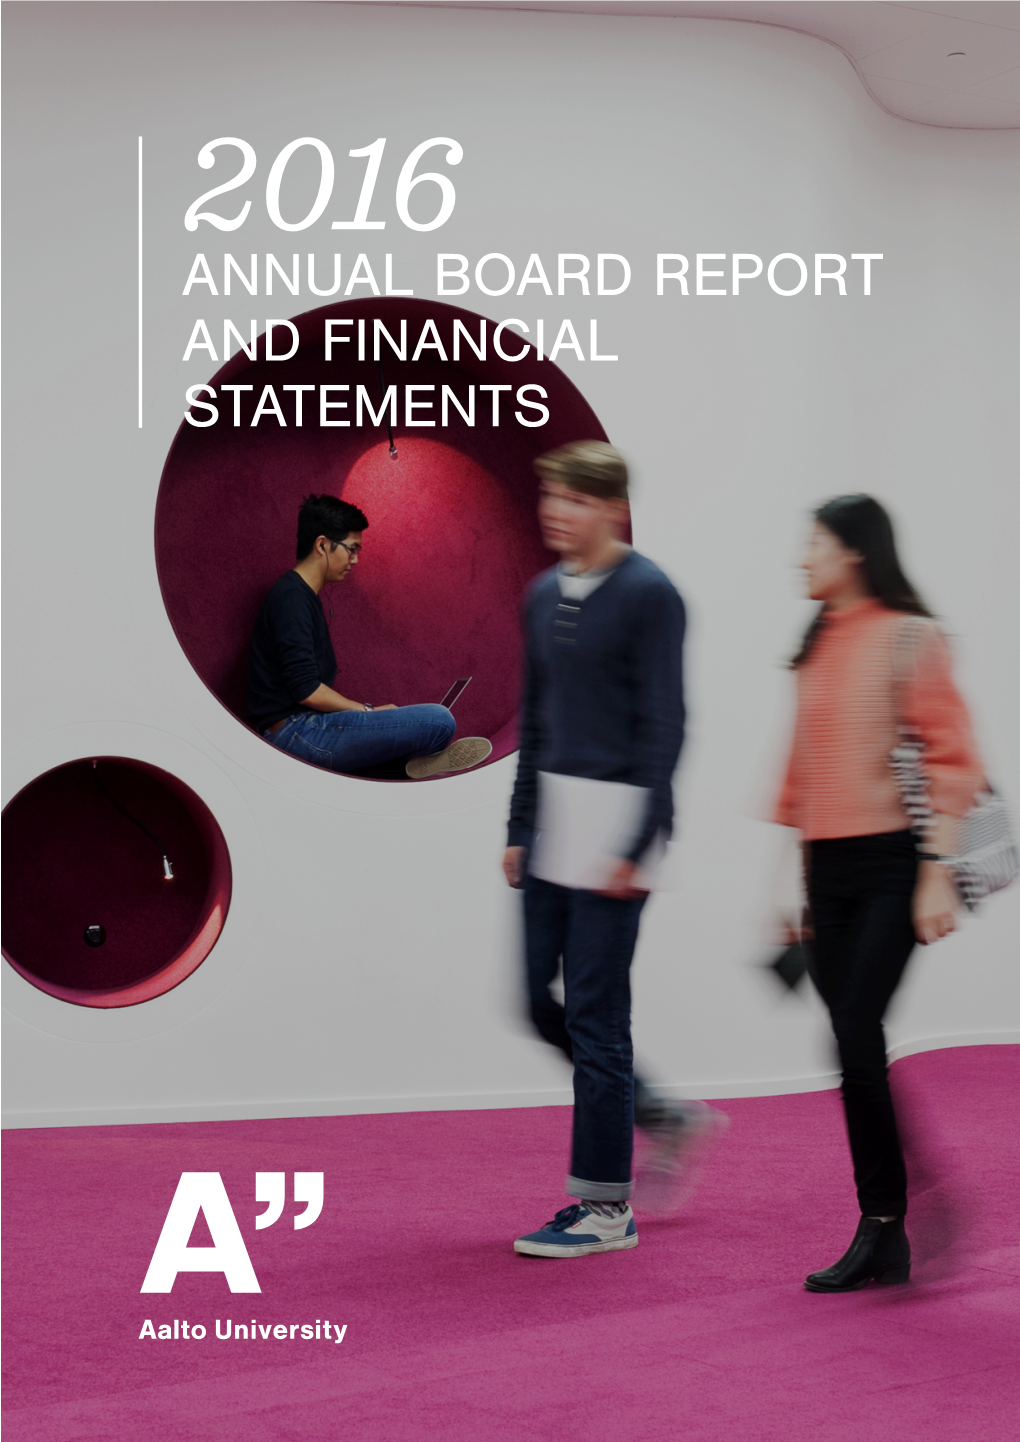 Aalto University Annual Board Report and Financial Statements 2016